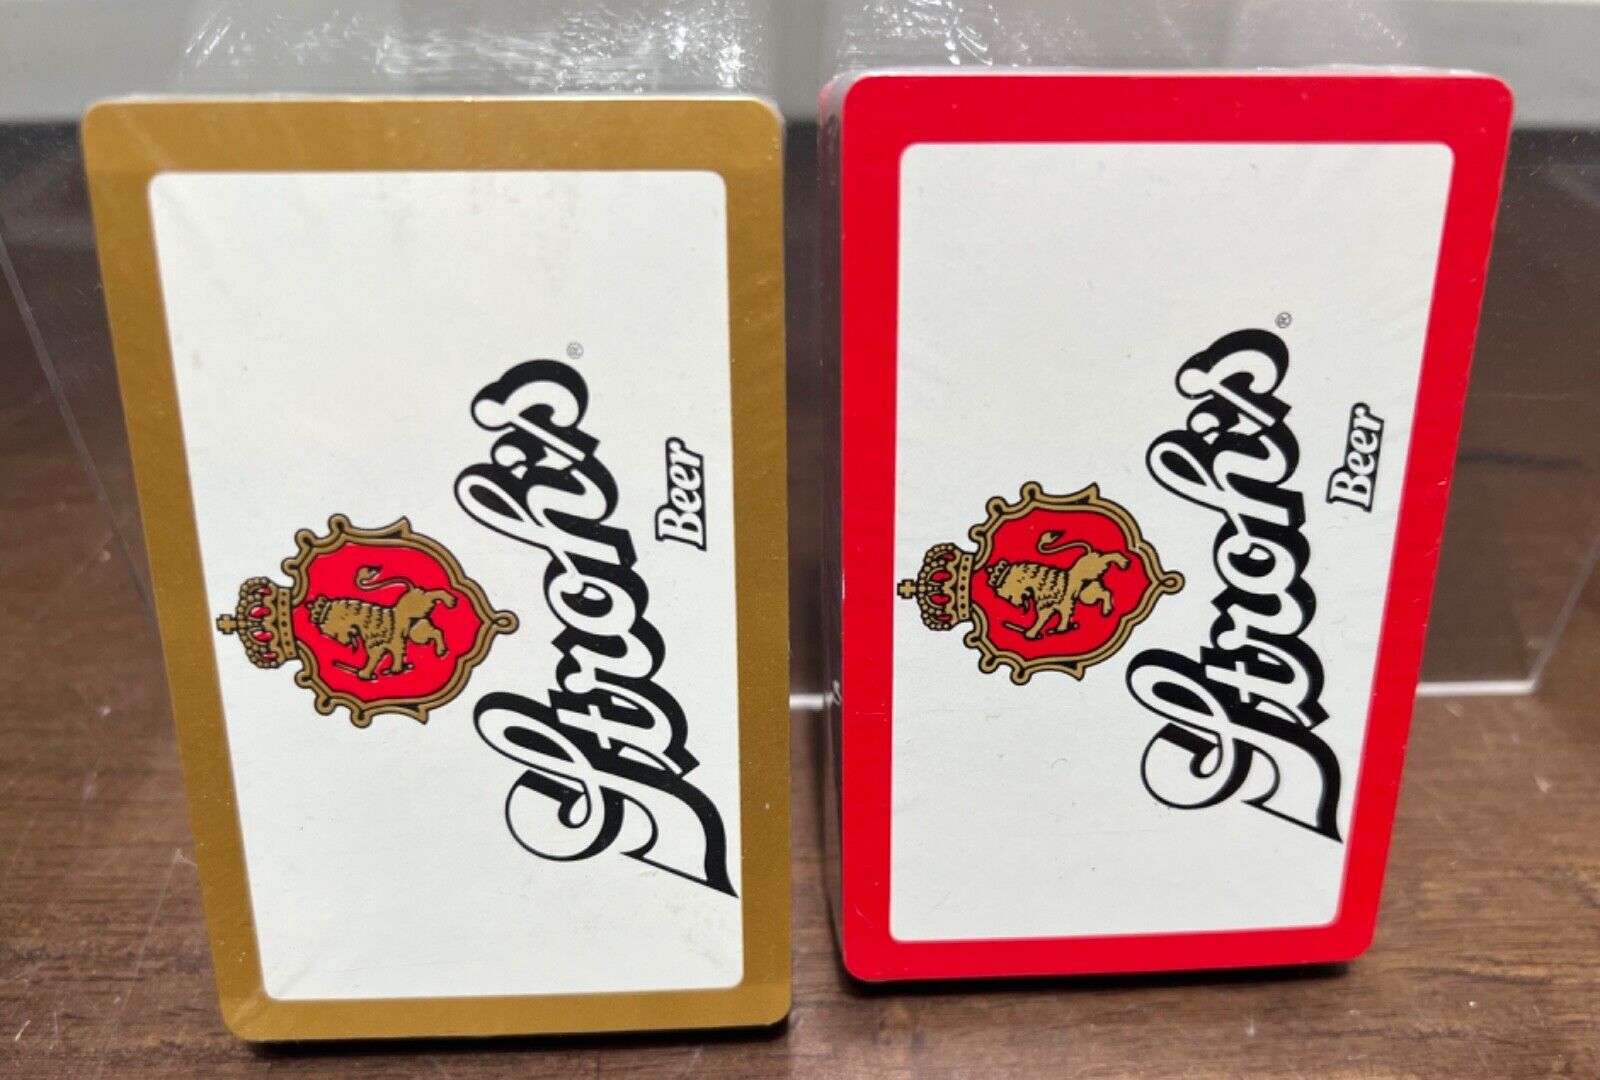 2 NOS Vtg packs Stroh’s Beer Playing Cards unopened SEALED deck advertisements